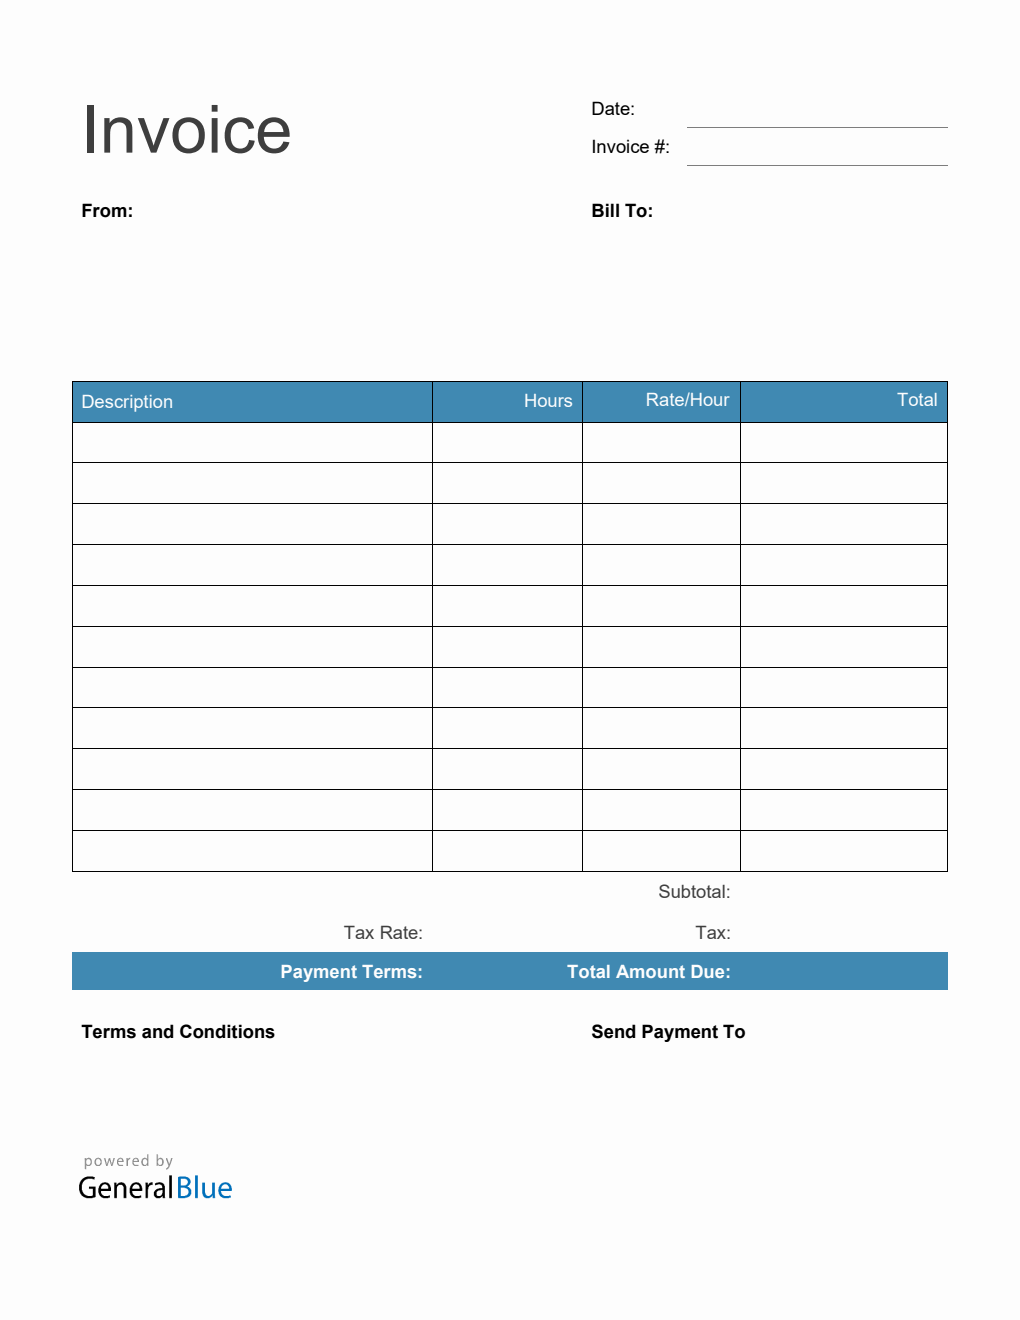 PDF Invoice Template for U.S. Freelancers With Tax calculation (Blue)